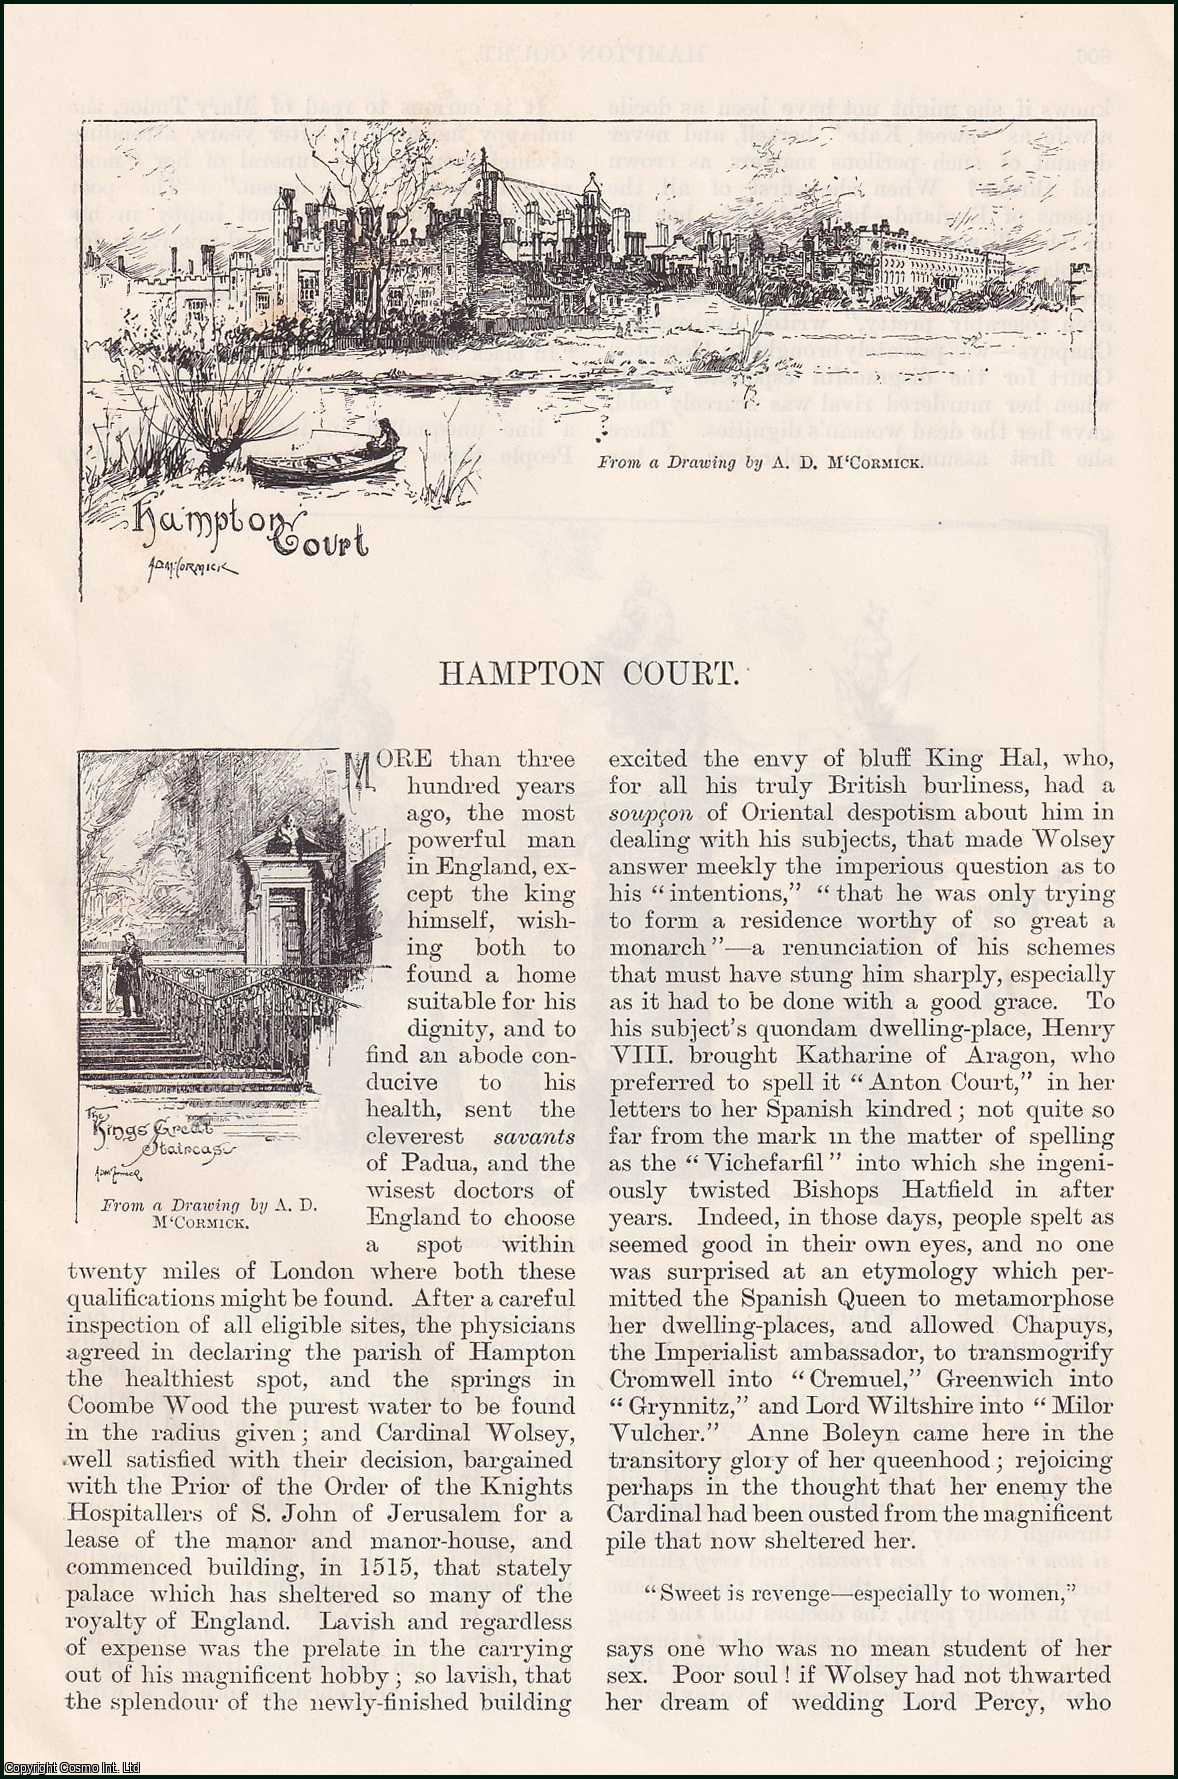 Barbara Clay Finch, illustrations by A.D. McCormick - Hampton Court. An original article from the English Illustrated Magazine, 1888.